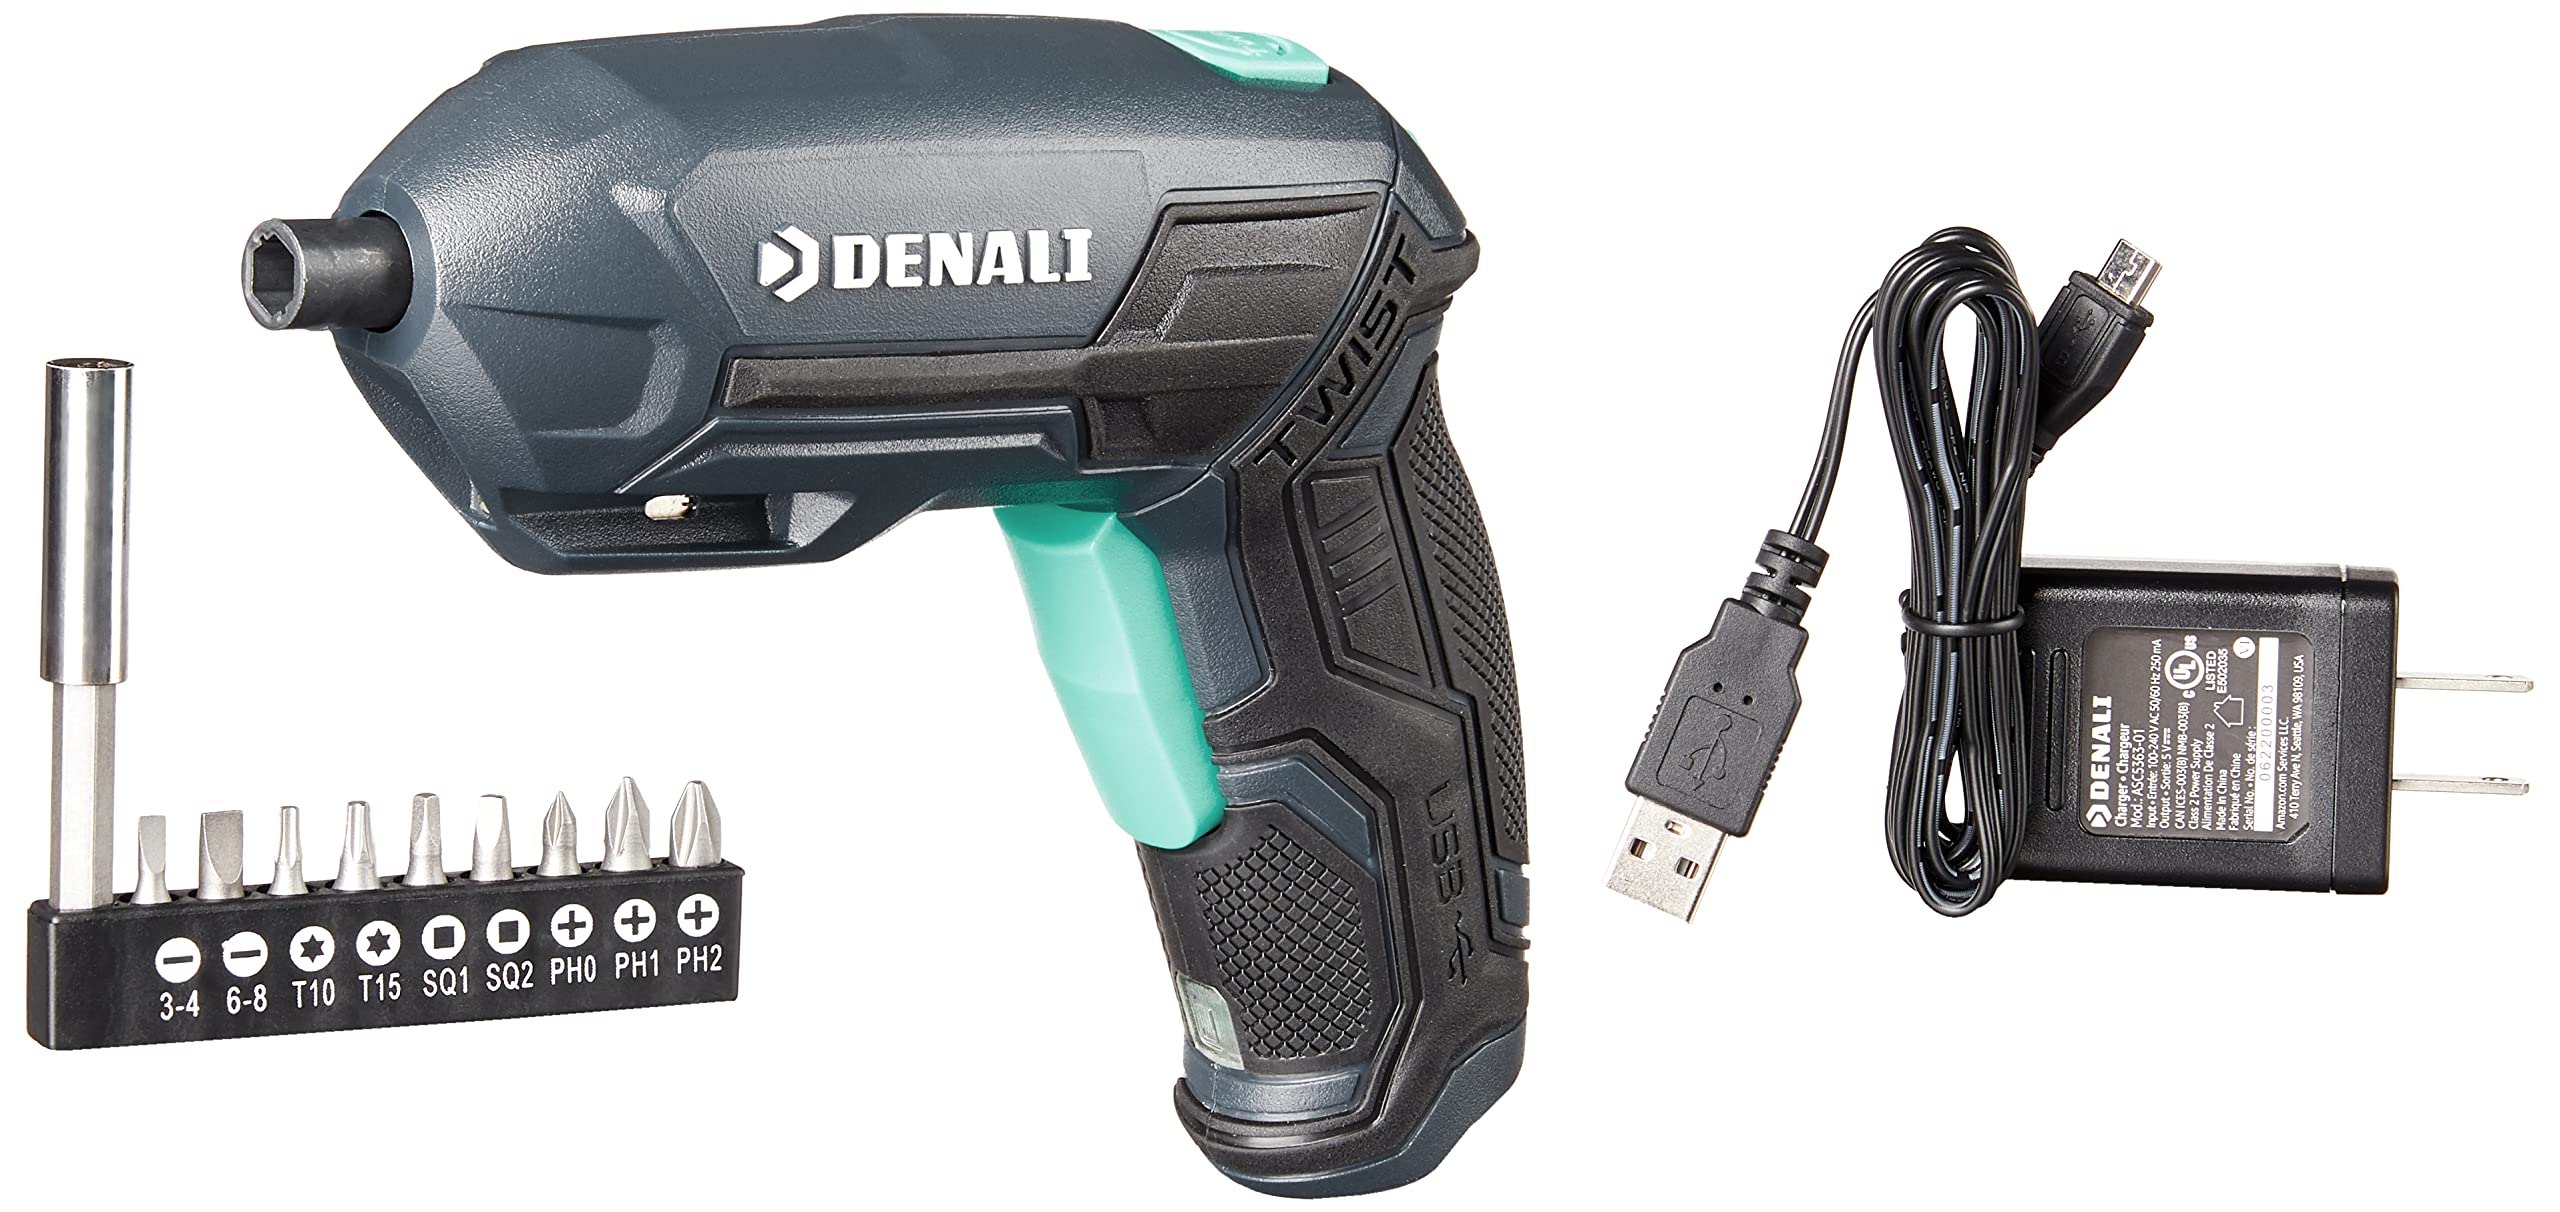 Amazon Brand - Denali by SKIL 4V Cordless Pivoting Screwdriver with10-Piece Bit Set and USB Charger並行輸入品